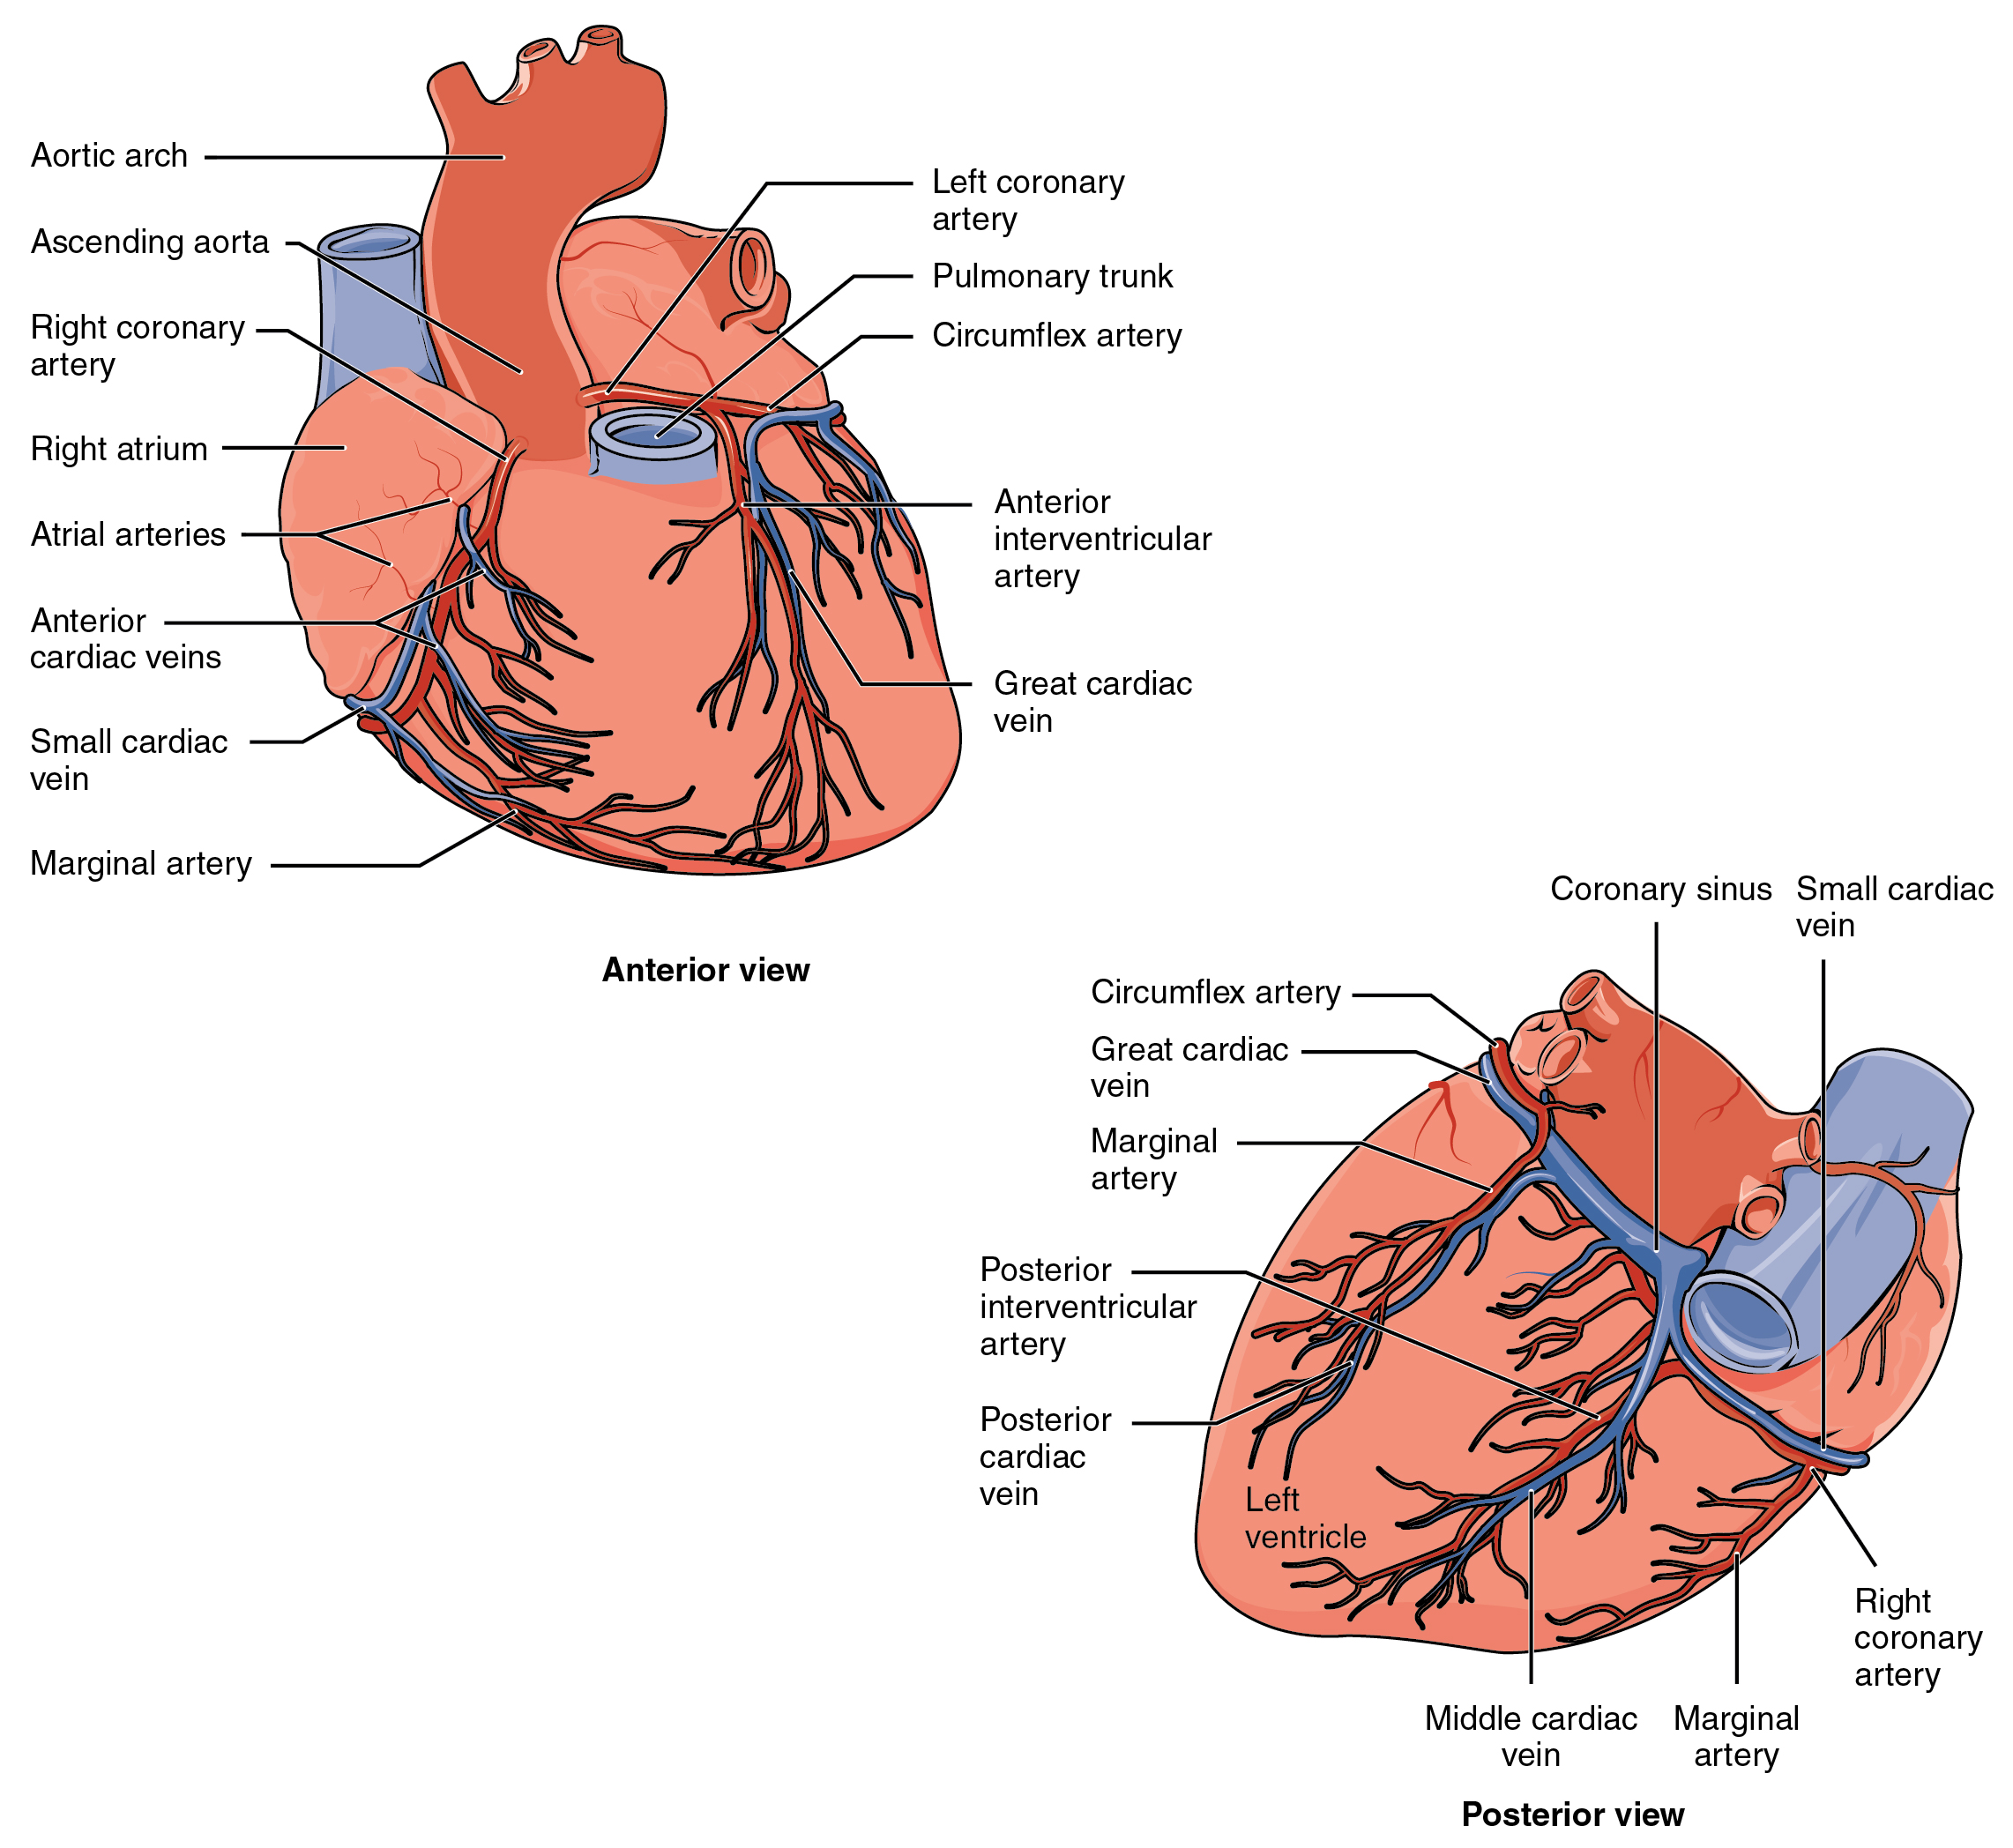 Labeled diagrams of anterior and posterior views of the major coronary vessels as they are positioned around the surface of the heart.